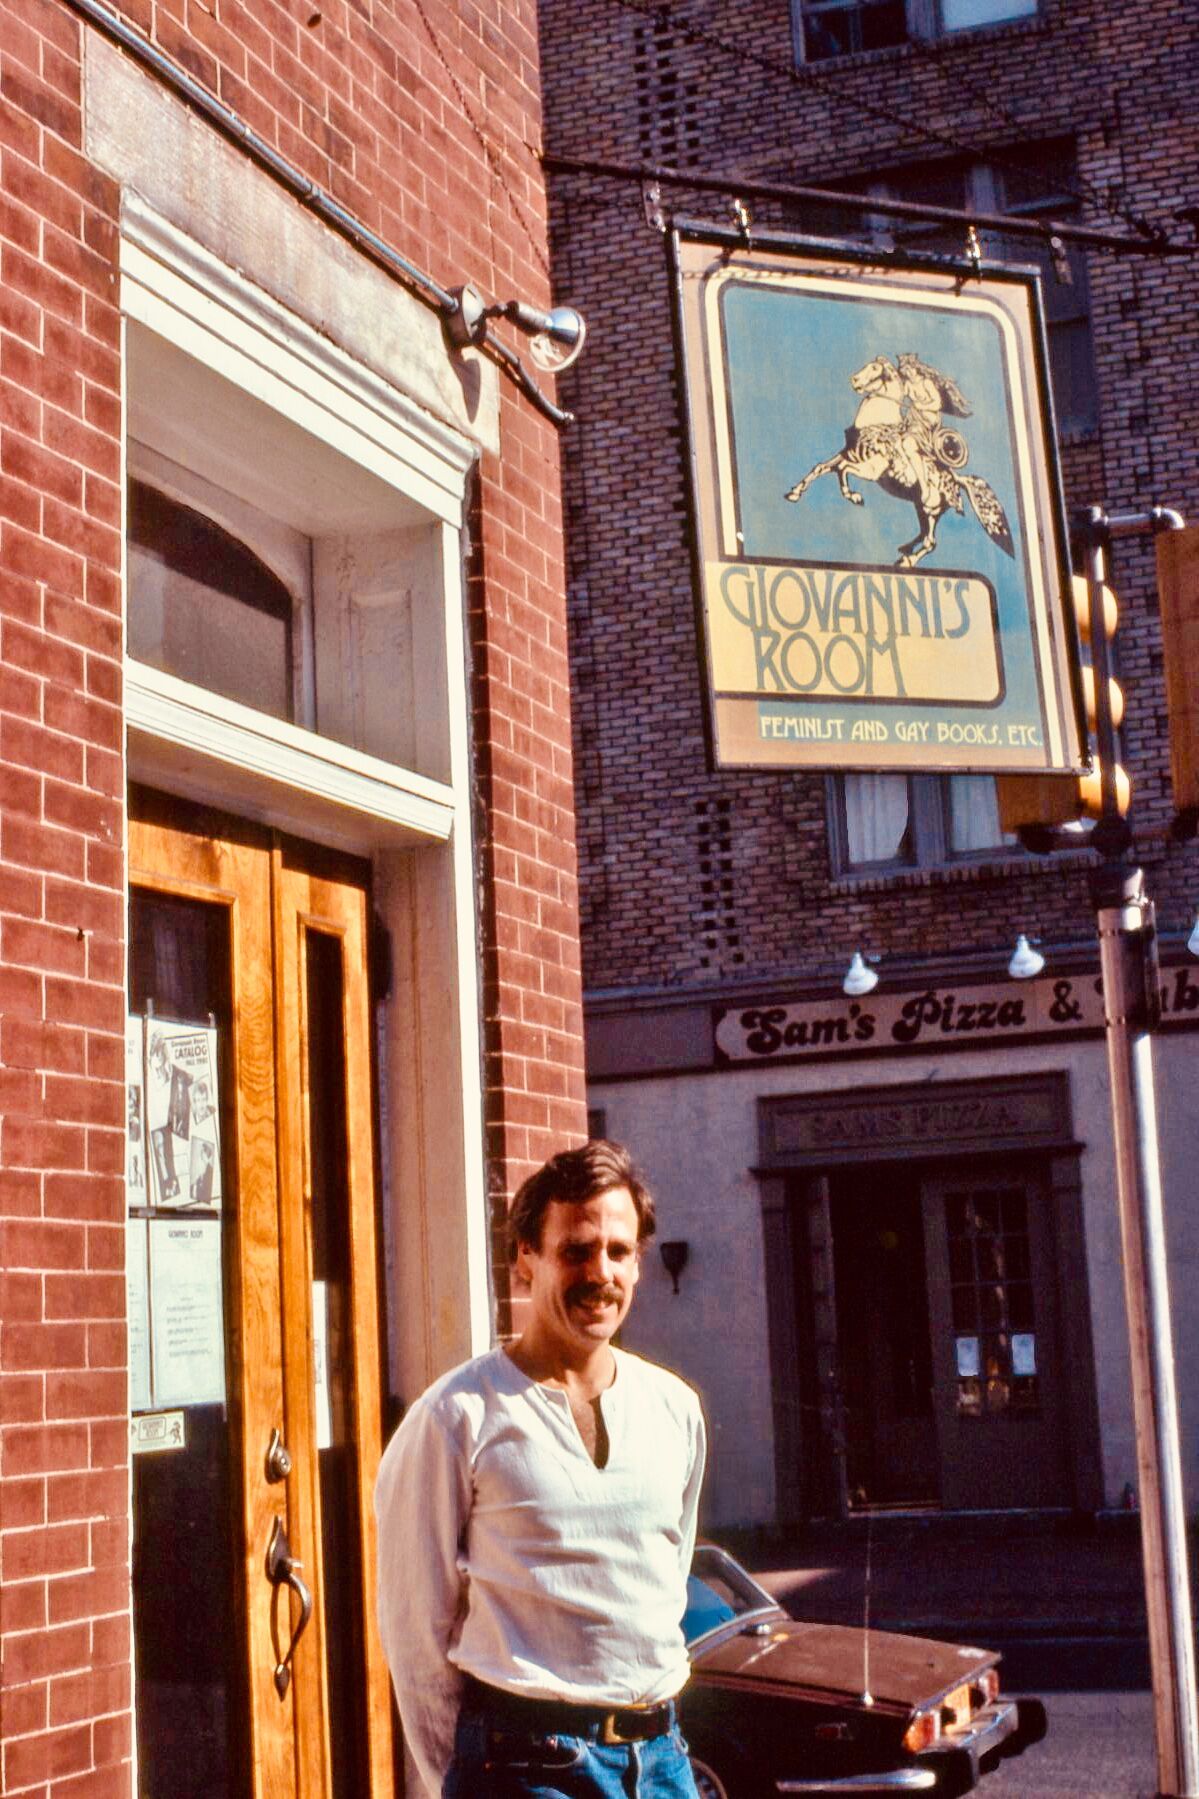 Ed Hermance standing in front of Giovanni’s Room in the 1980s.